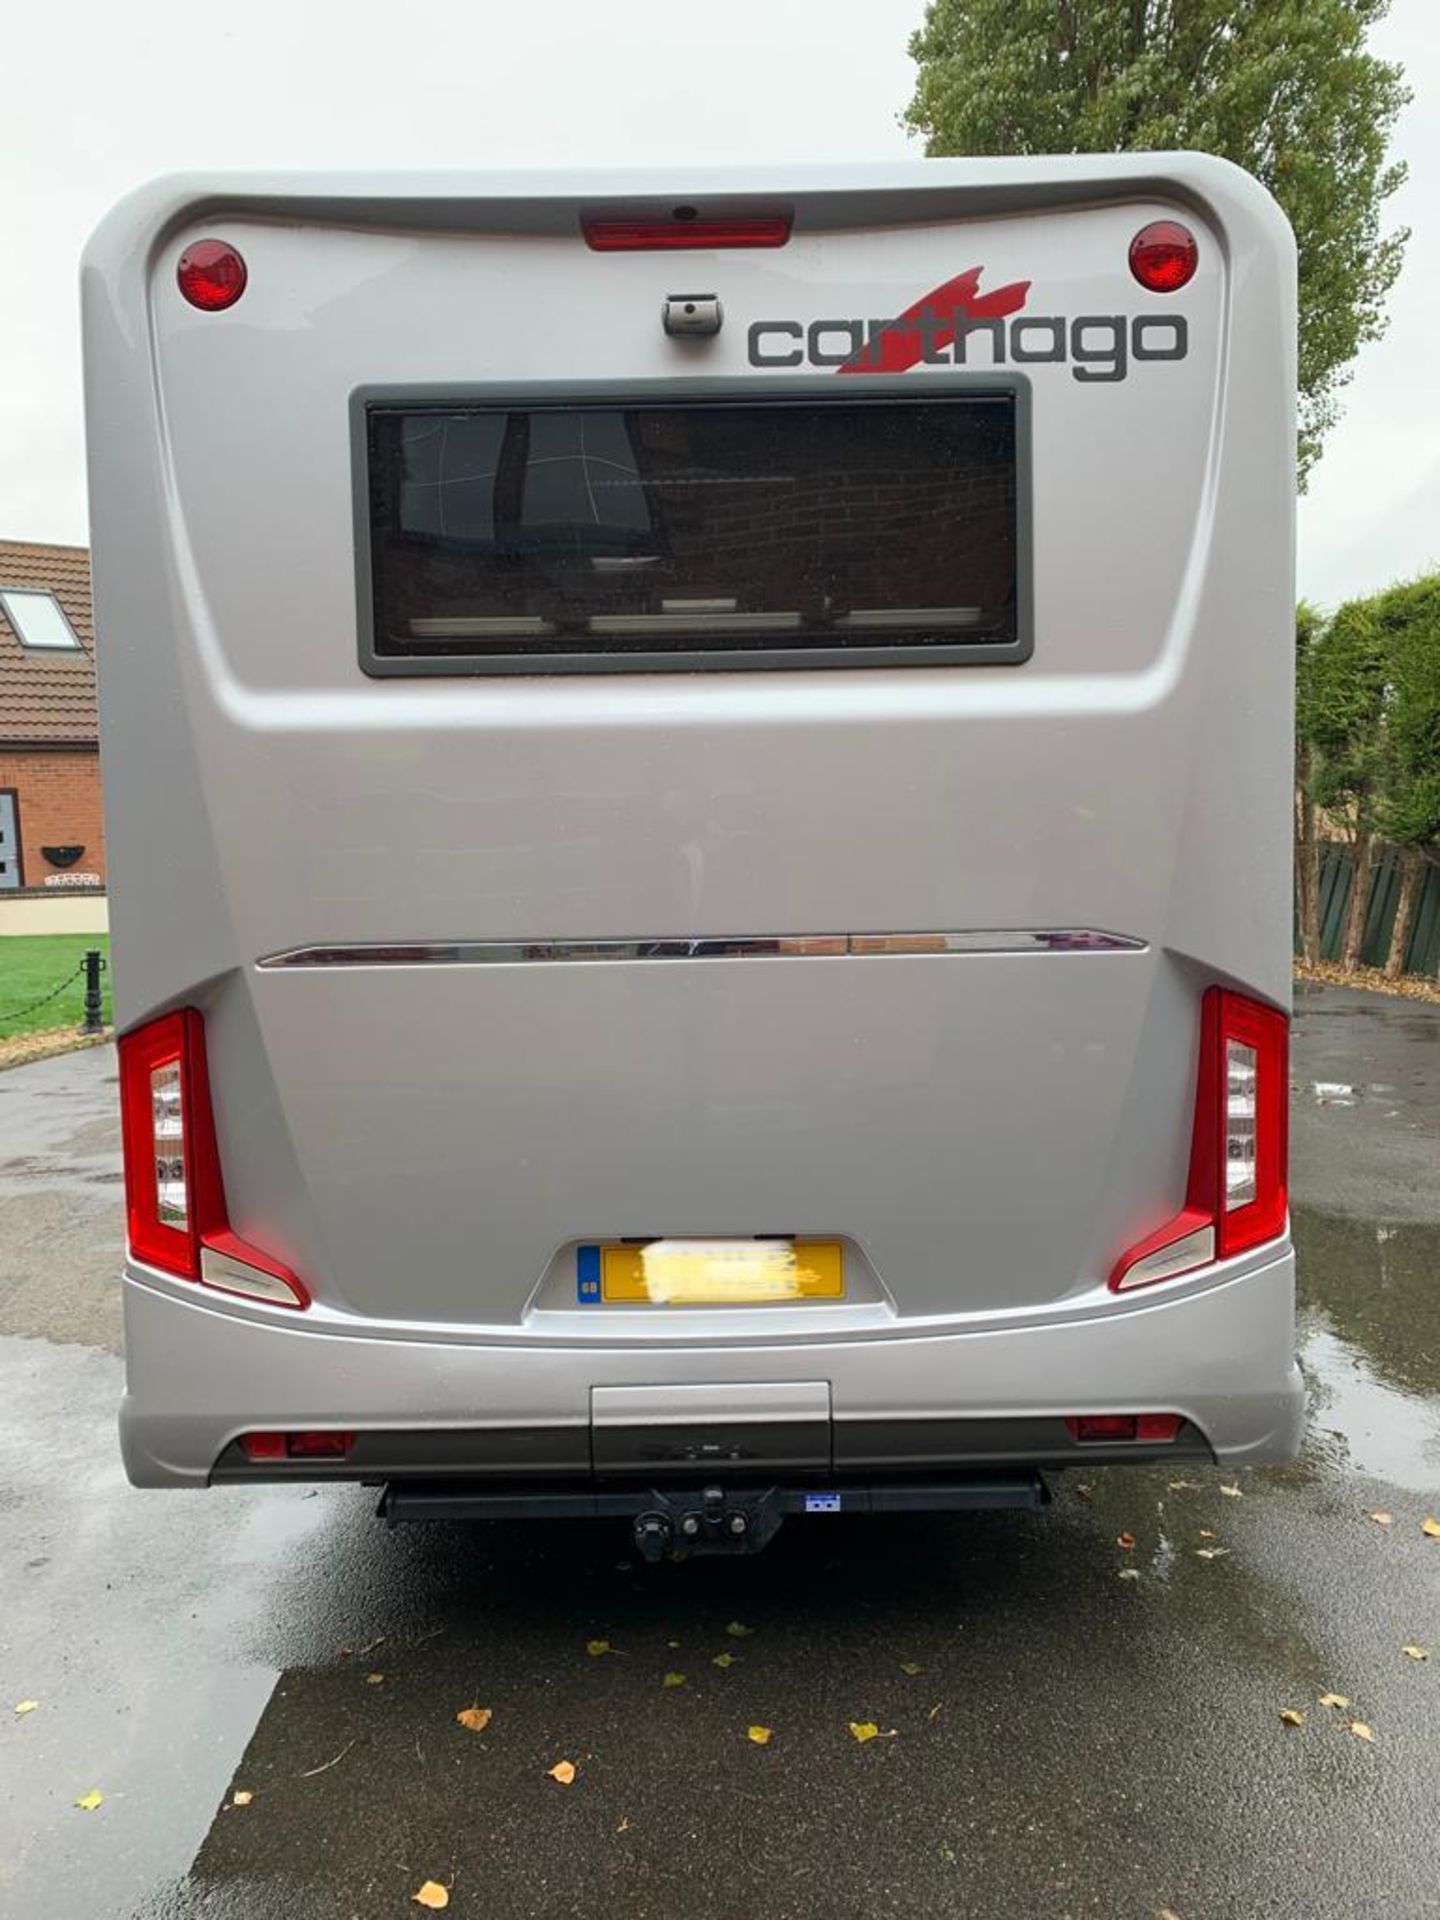 2020 CARTHAGO LINER-FOR-TWO 53L MOTORHOME 11 mths WARRANTY 4529 MILES, MINT CONDITION NO VAT - Image 4 of 38